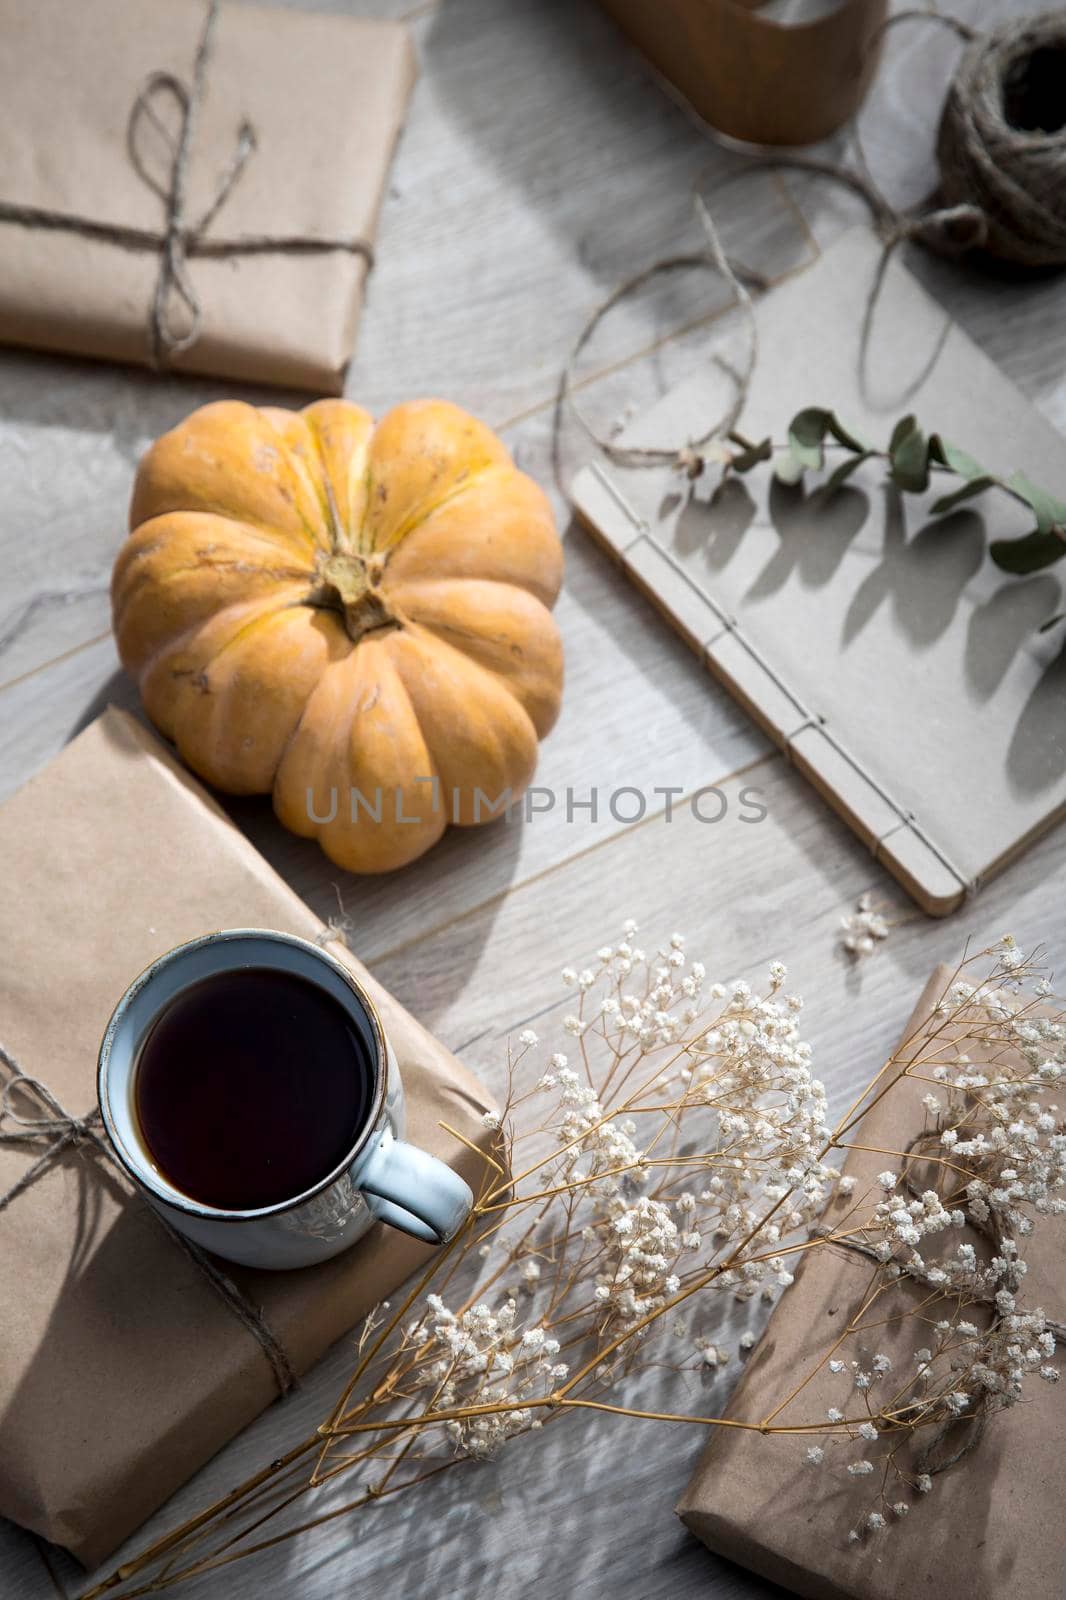 Packaged and bandaged gifts, pumpkins, a cup of tea and dried plants are on the table. Preparing for the birthday. Grunge